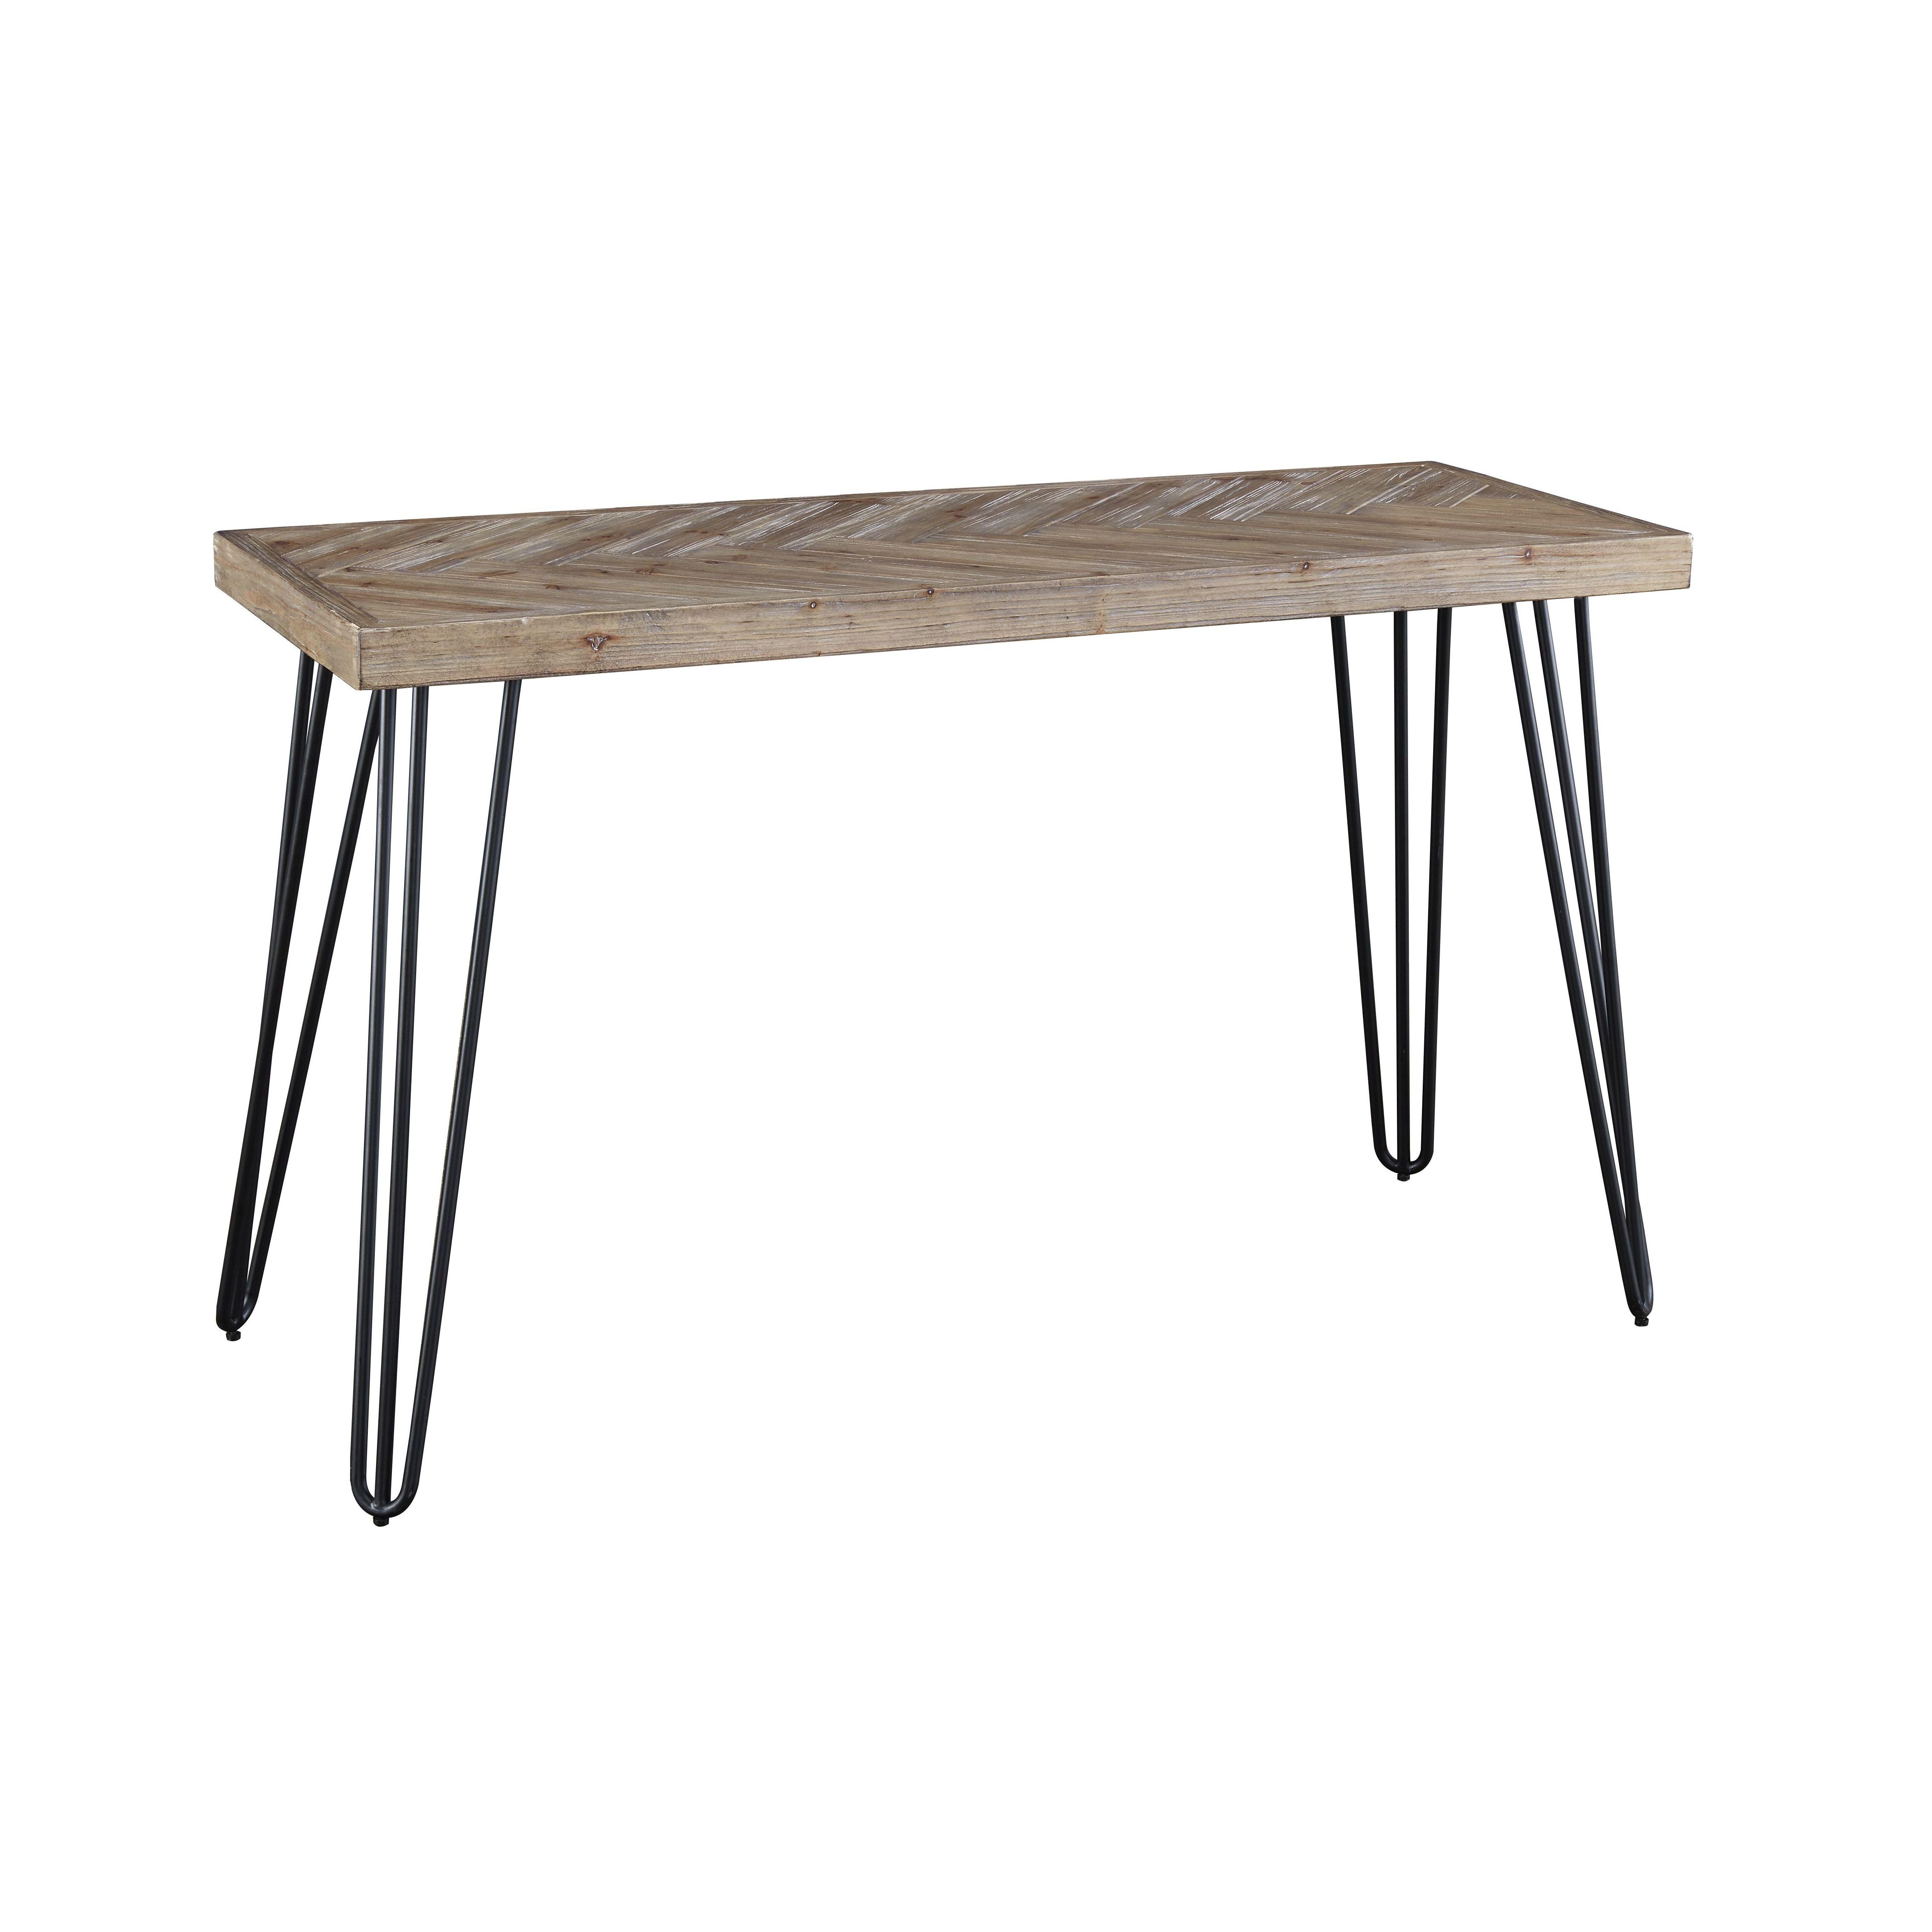 Modern Console Table EVERSON DVV123 in Sand 